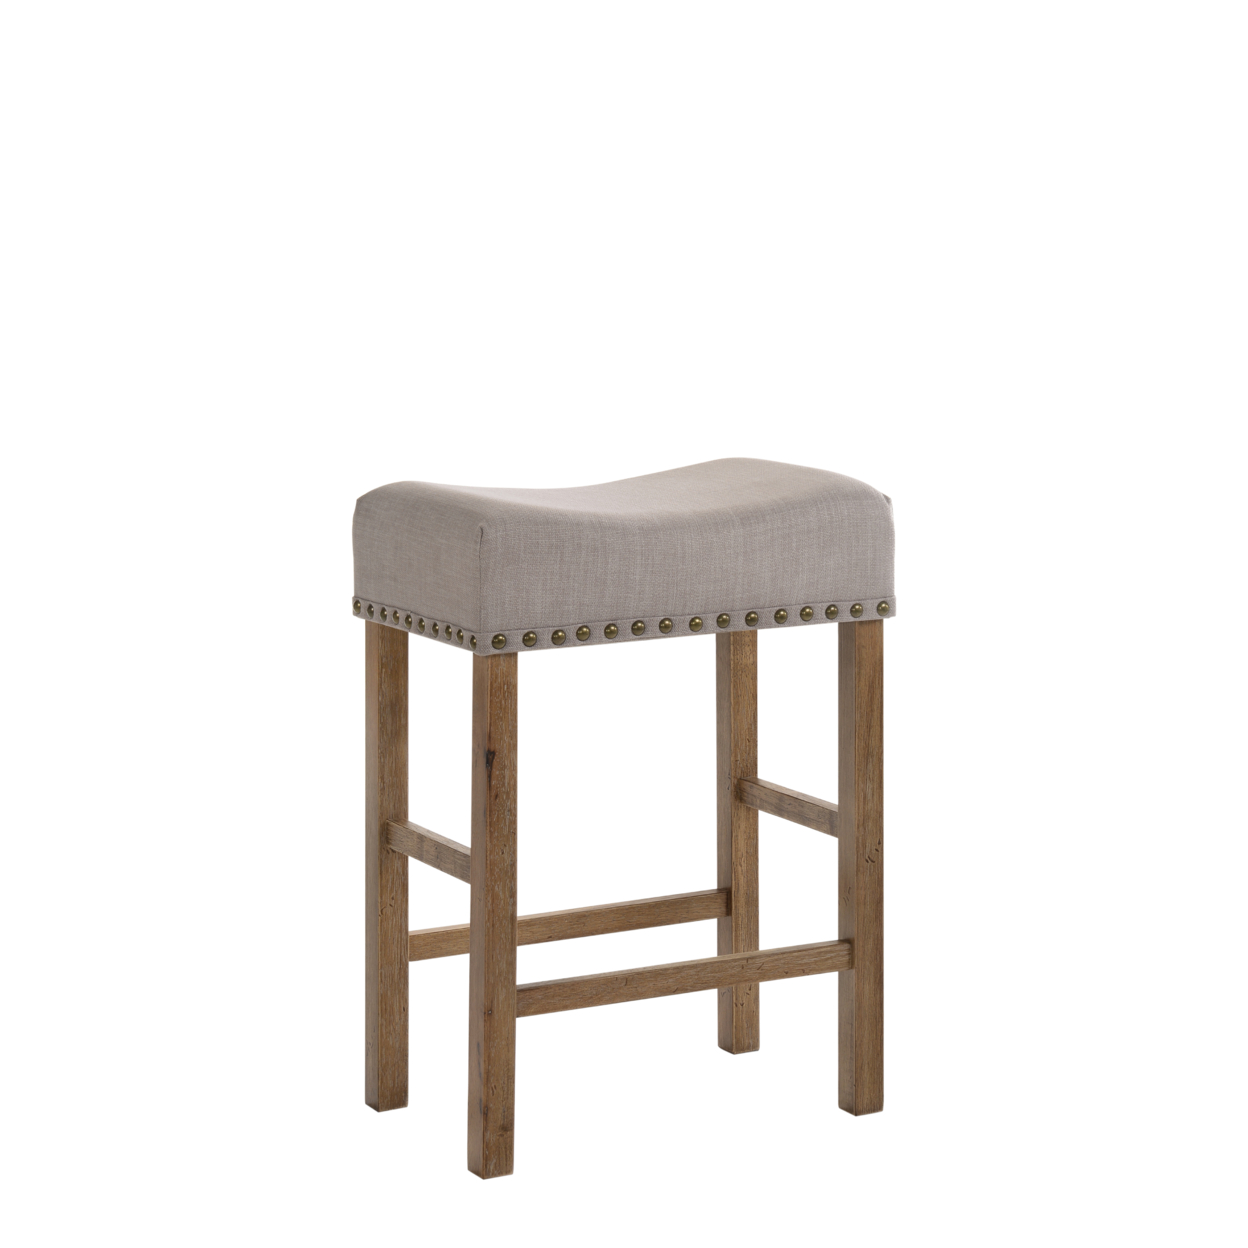 Fabric Upholstered Wooden Counter Height Stool,Set Of 2,Brown And Gray- Saltoro Sherpi